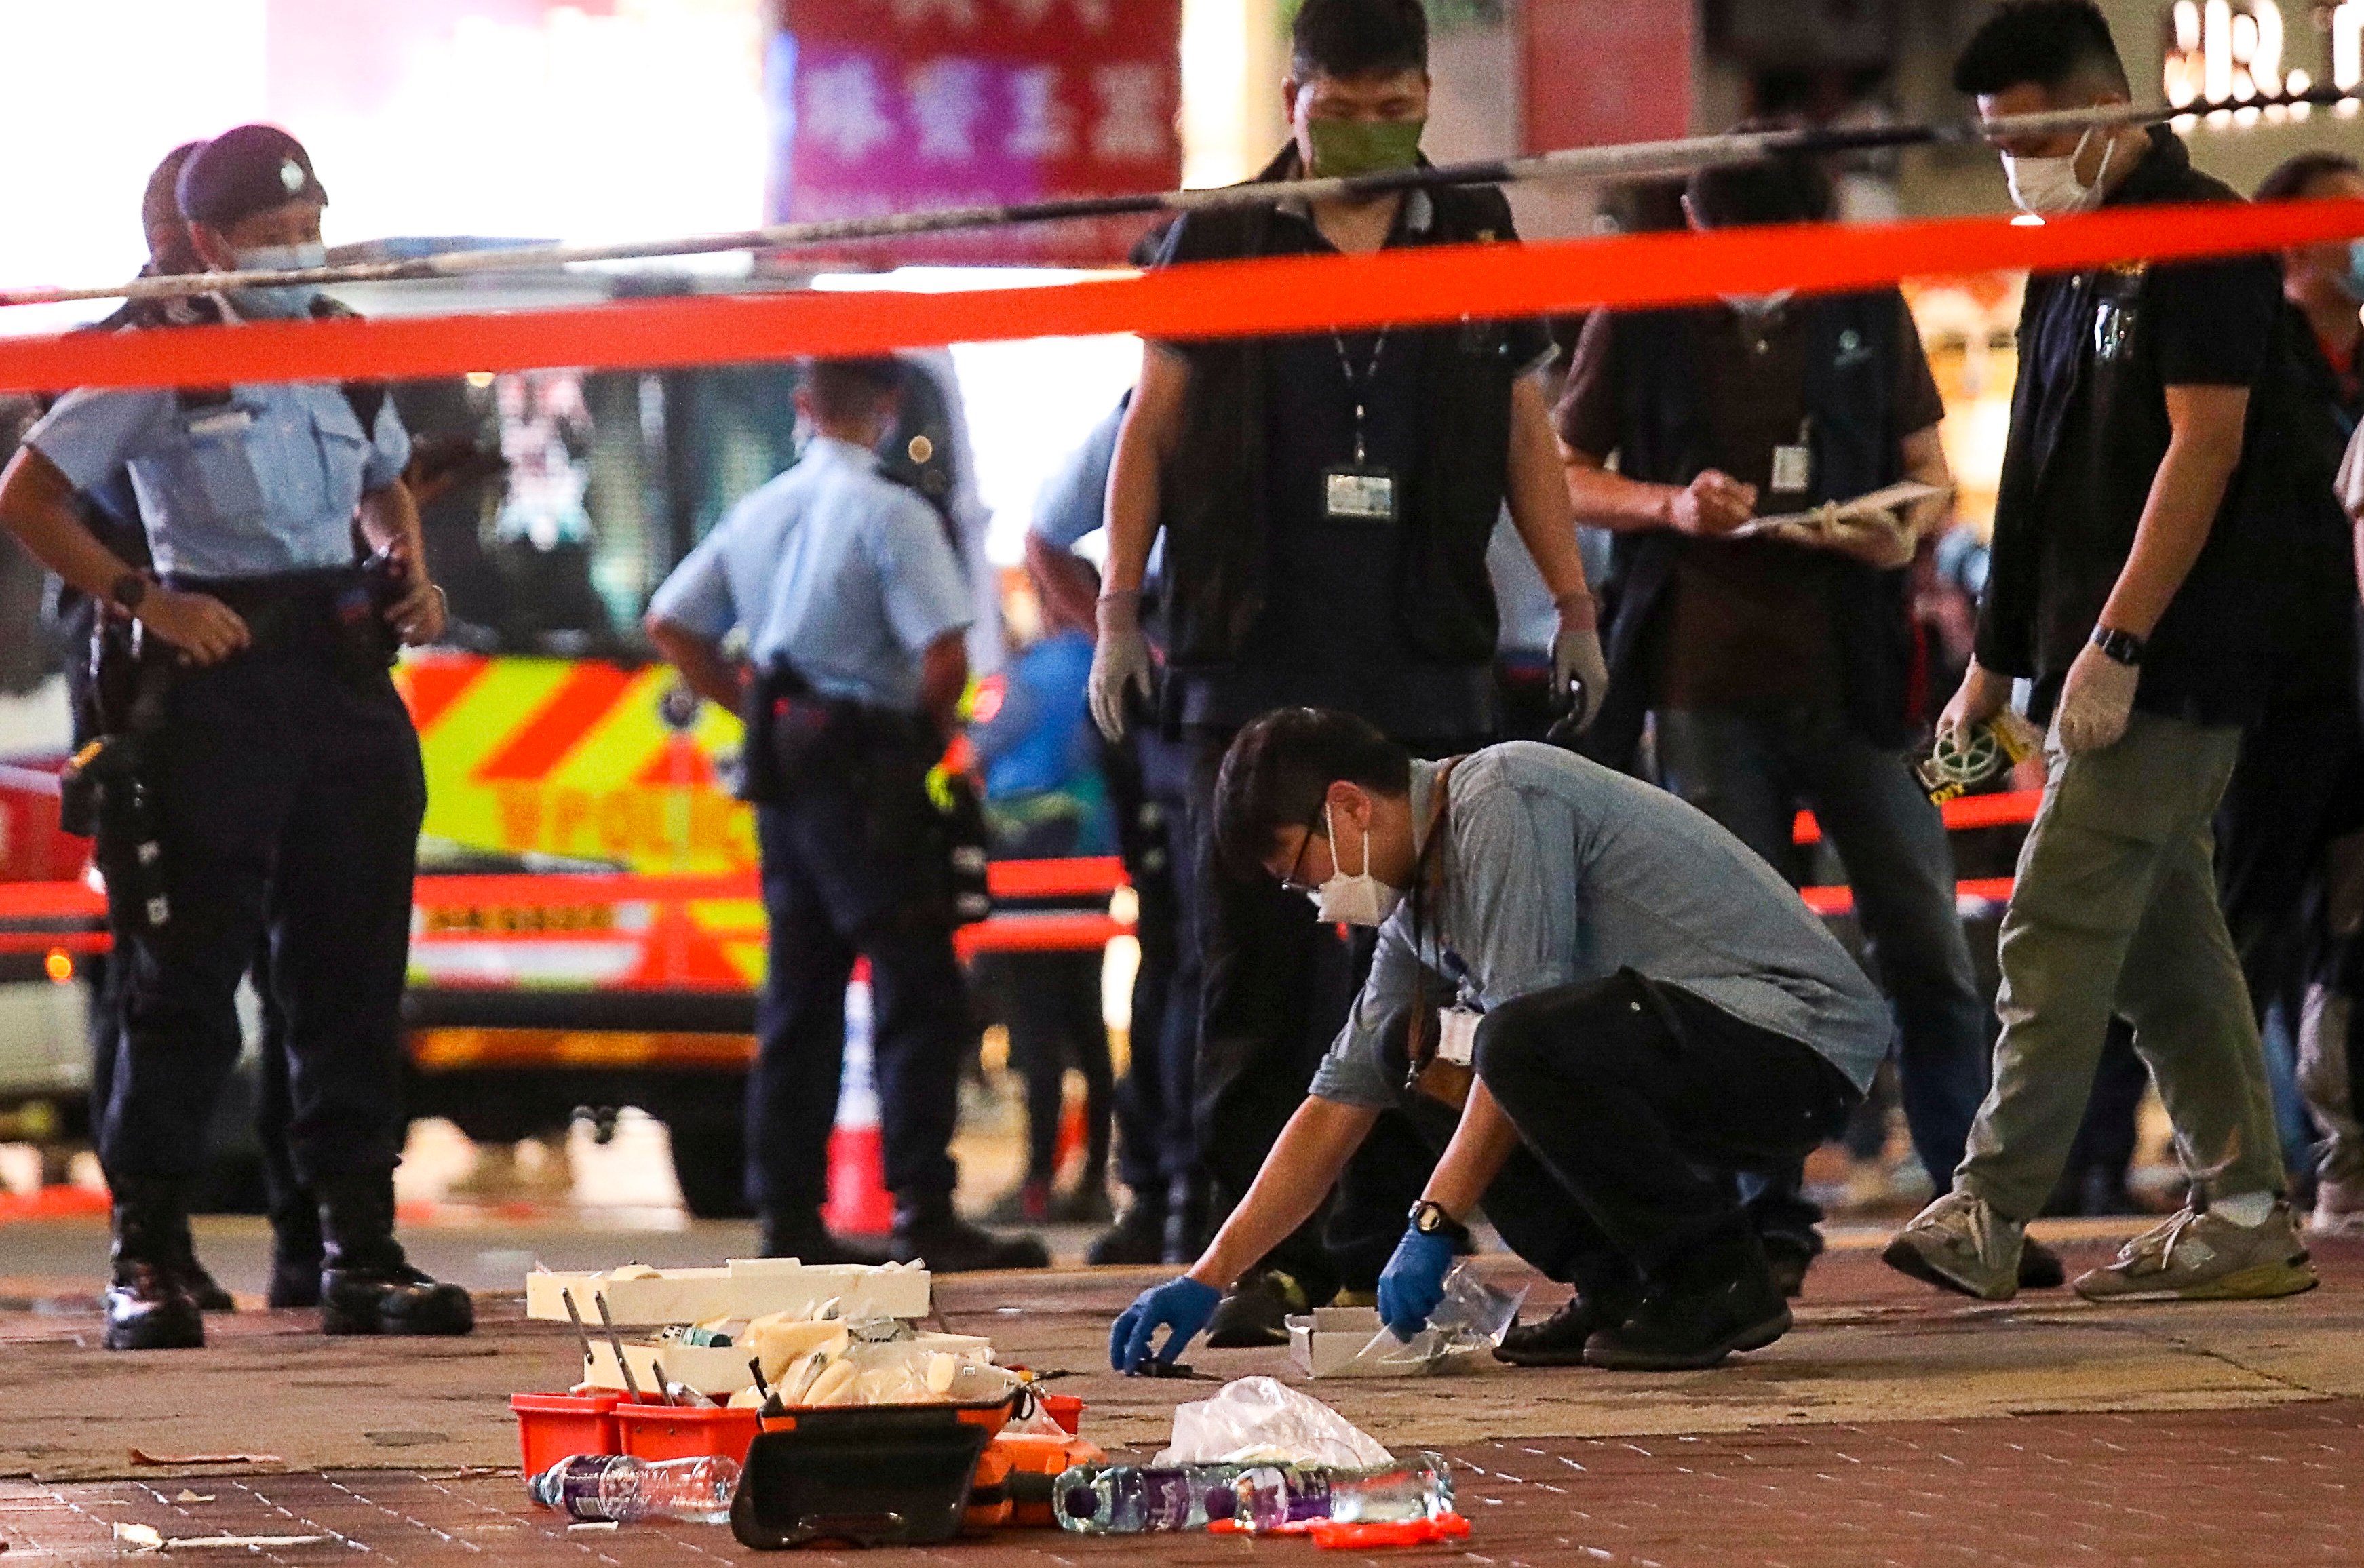 Former Vitasoy purchasing agent Leung Kin-fai drove a dagger into constable So King-cho’s back outside the Sogo department store on July 1, 2021. Photo: Xiaomei Chen